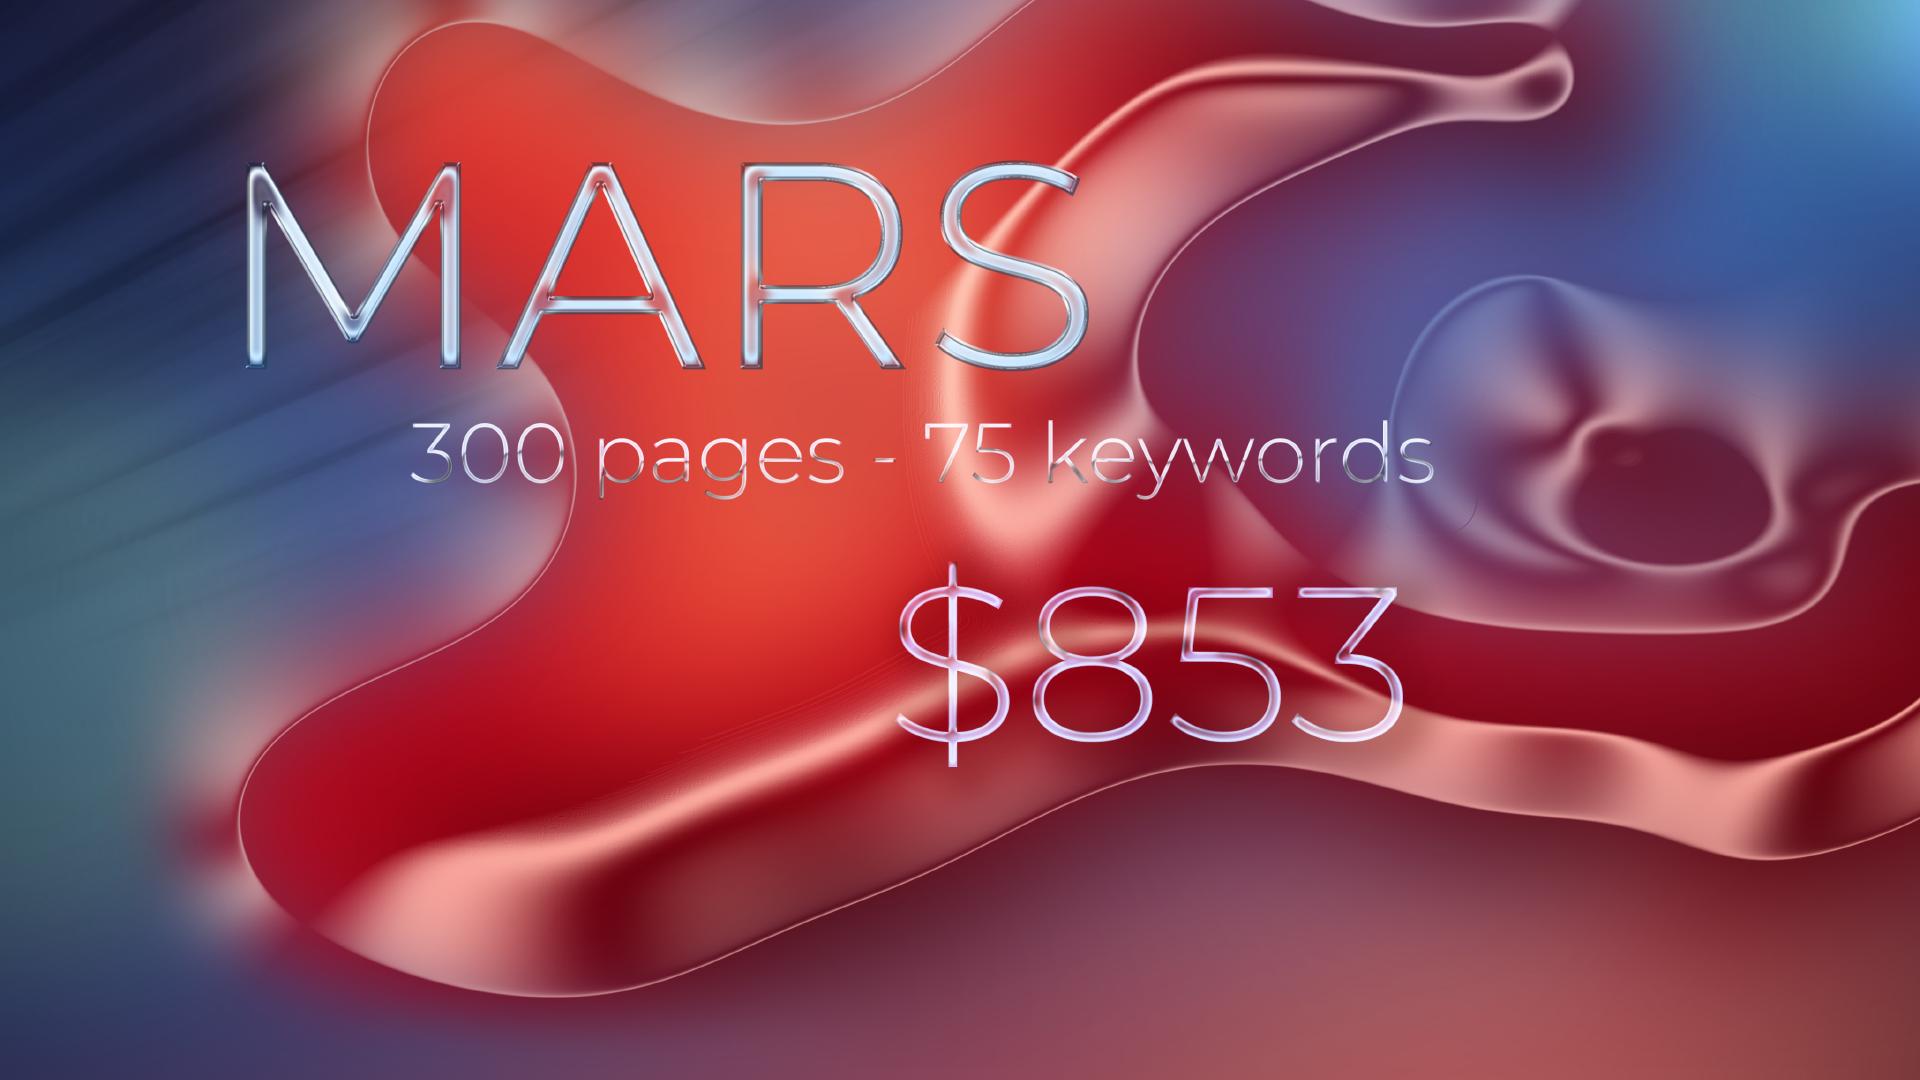 SEO package 'Mars': 300 pages - 75 keywords for $853